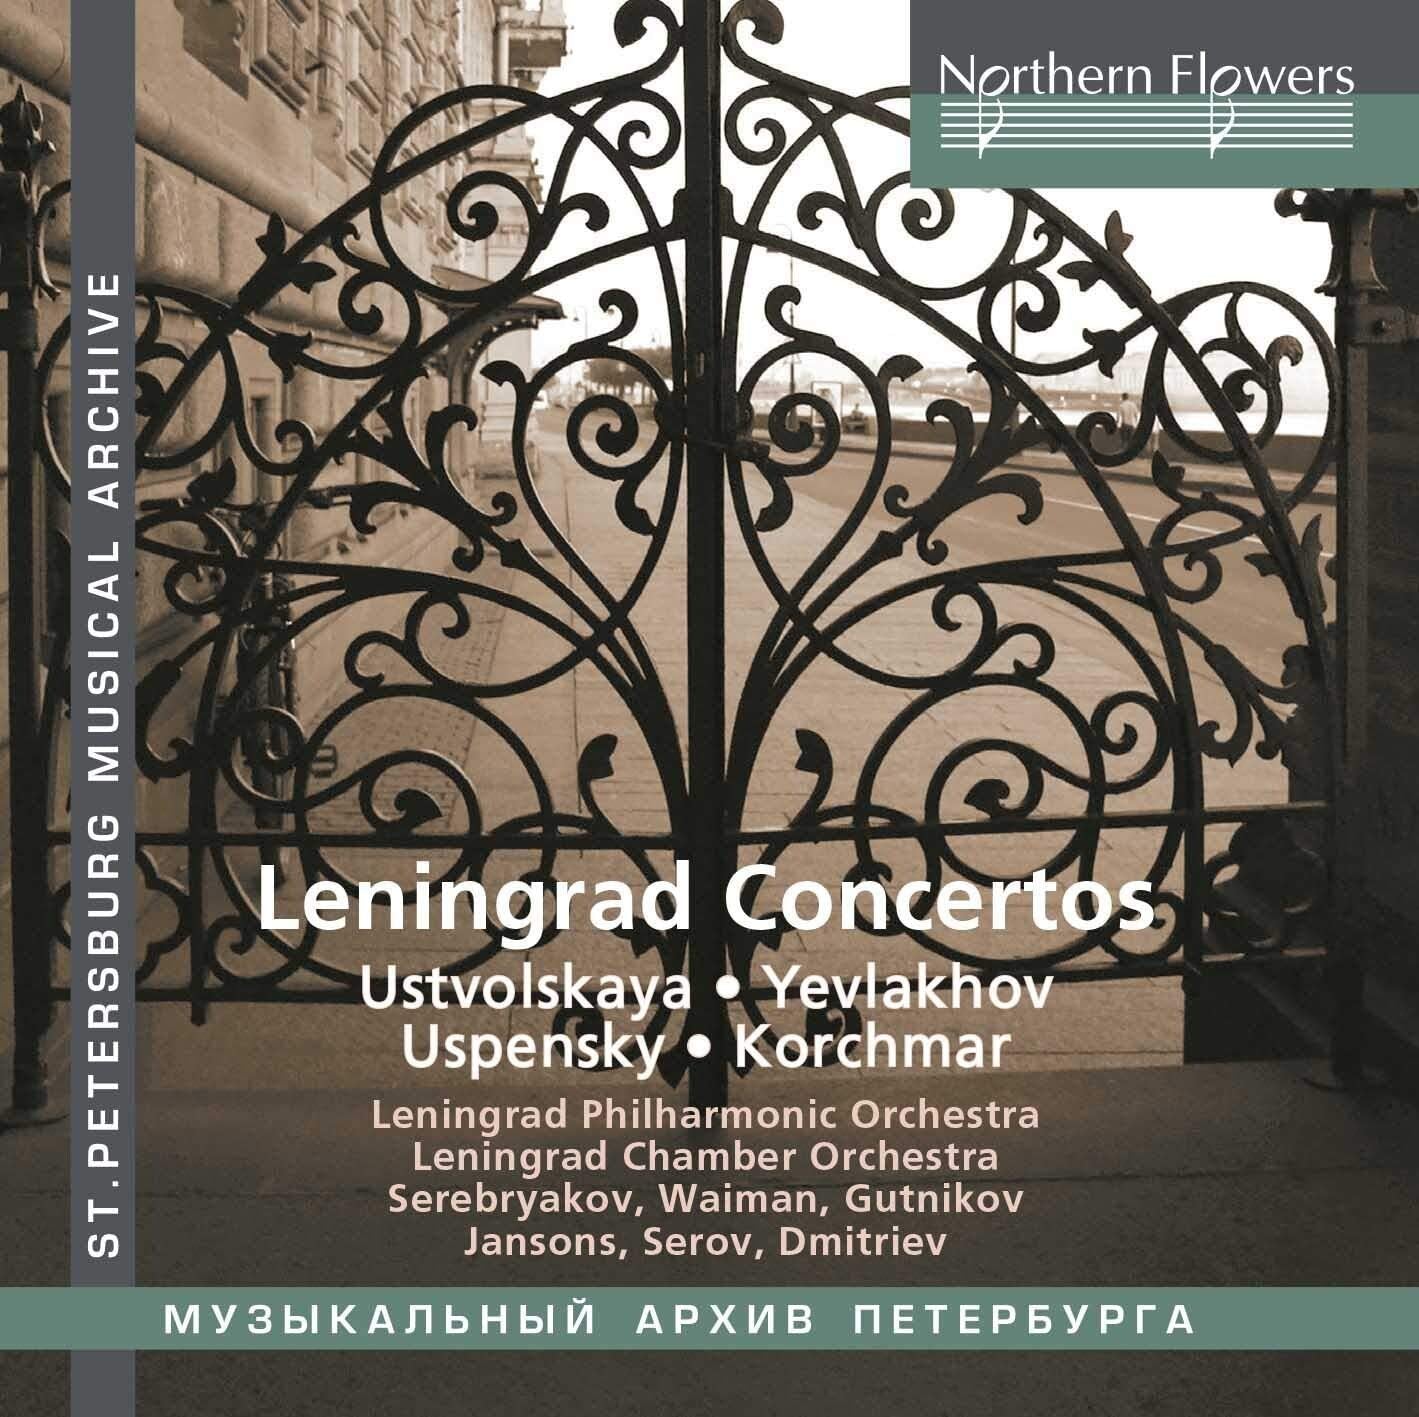 NORTHERN FLOWERS - LENINGRAD MUSIC COLLECTION 2023 (7 CDS FOR $25)